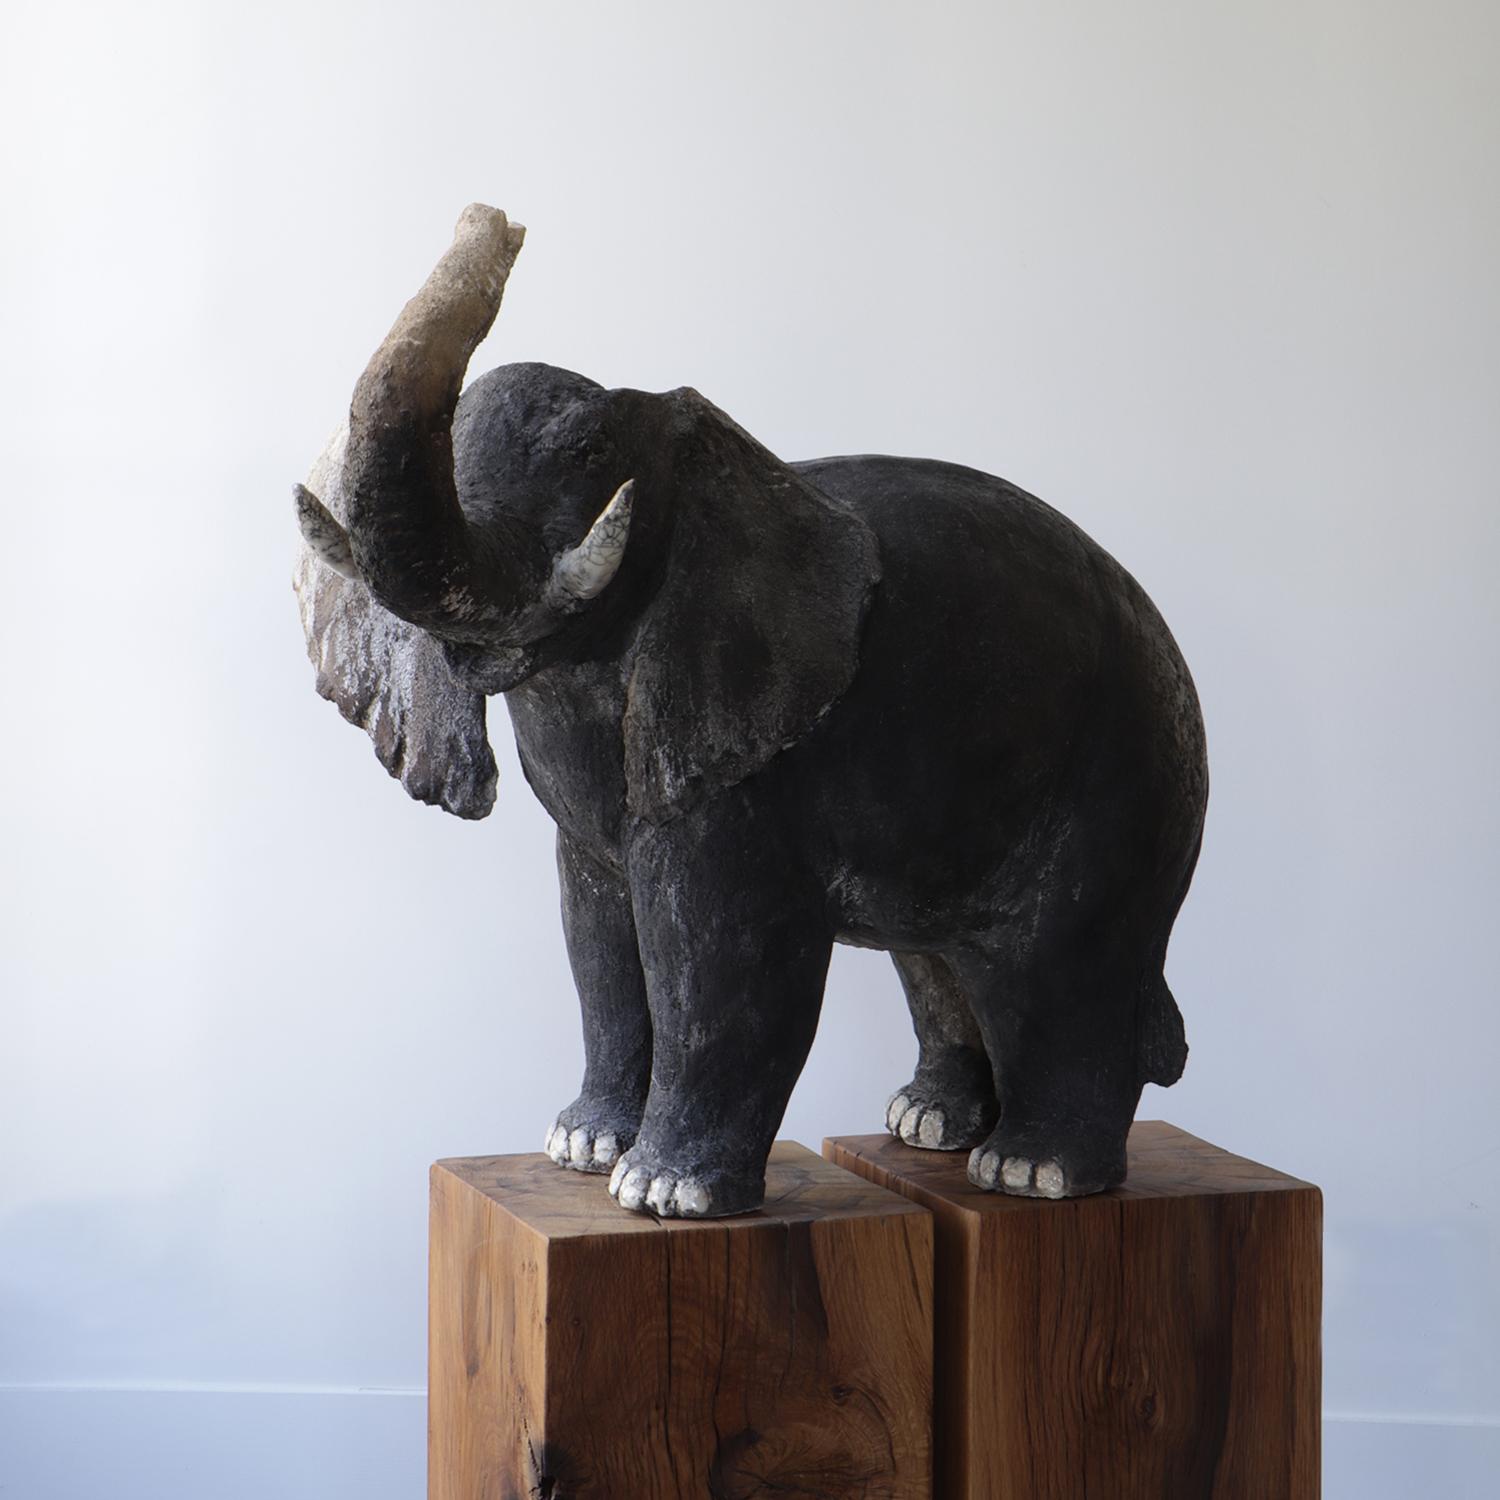 This very important elephant was made in glazed stoneware by the artist and sculptor Joanna Hair.